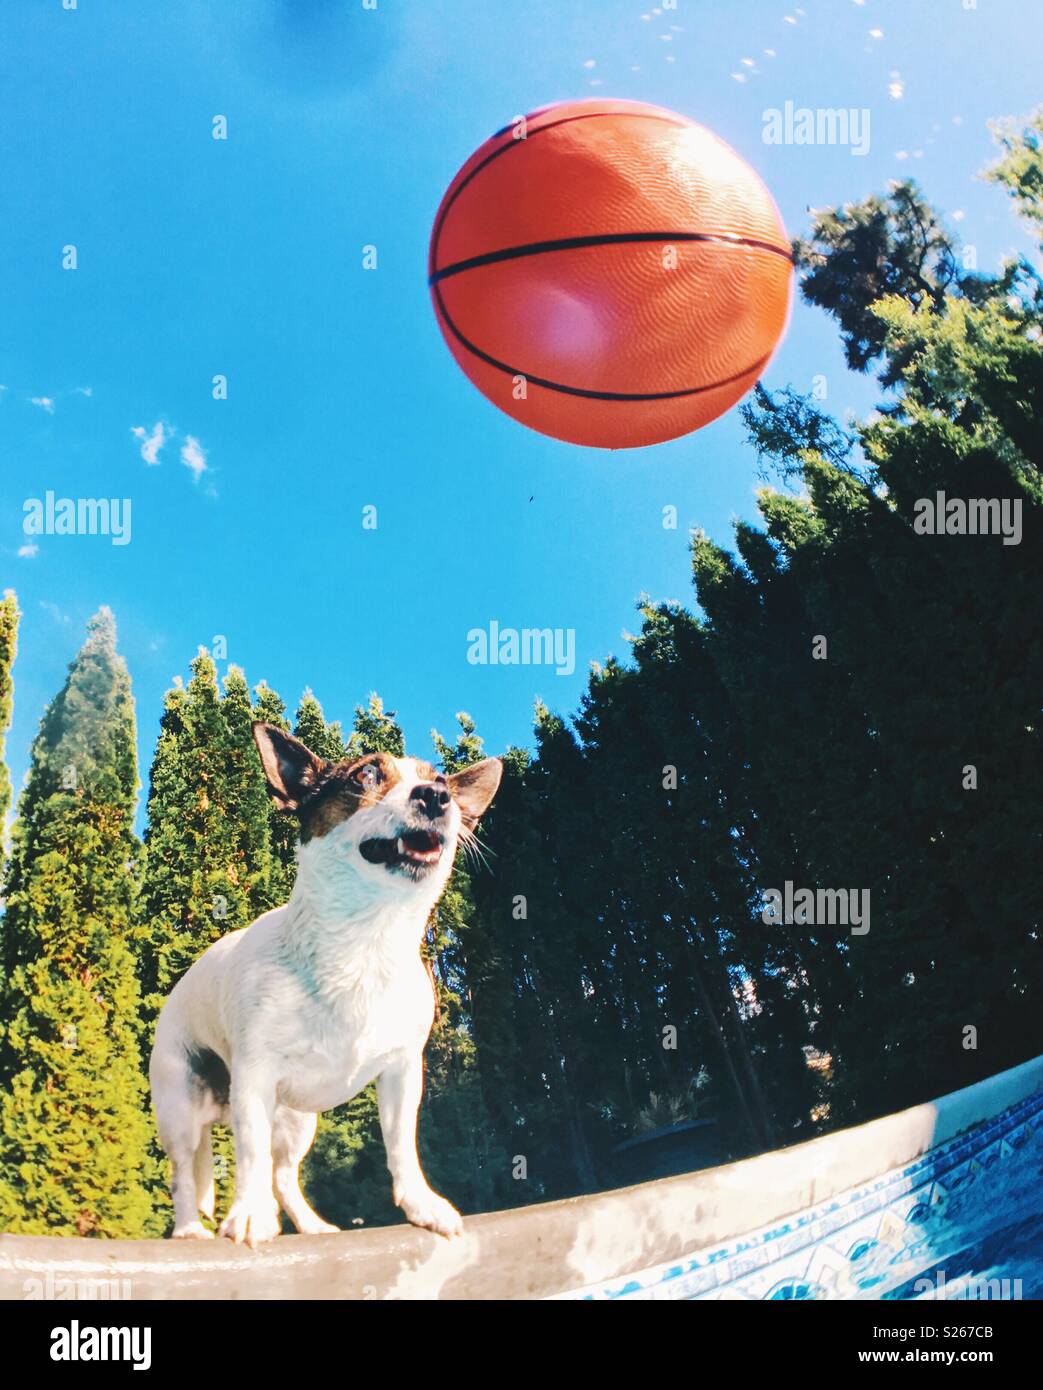 Jack Russell Terrier dog standing at the edge of a swimming pool intensely looking at a basketball heading towards her. Stock Photo